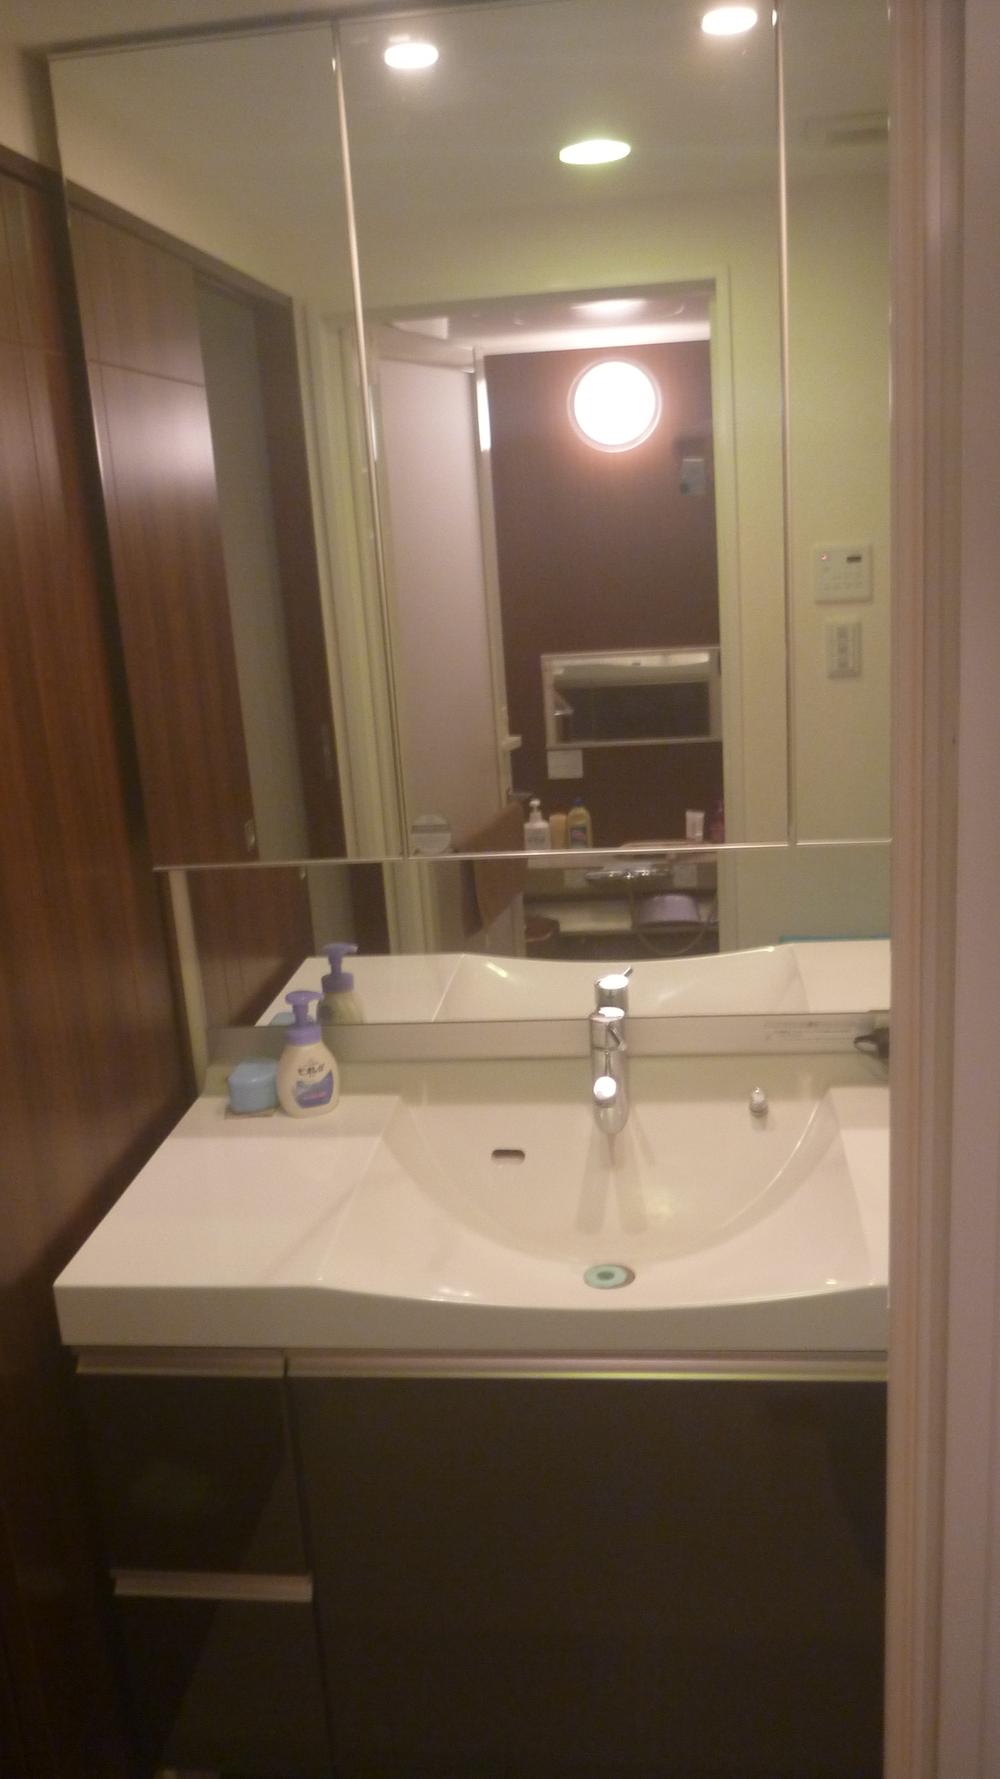 Wash basin, toilet. It is the washstand of a large mirror is very beautiful